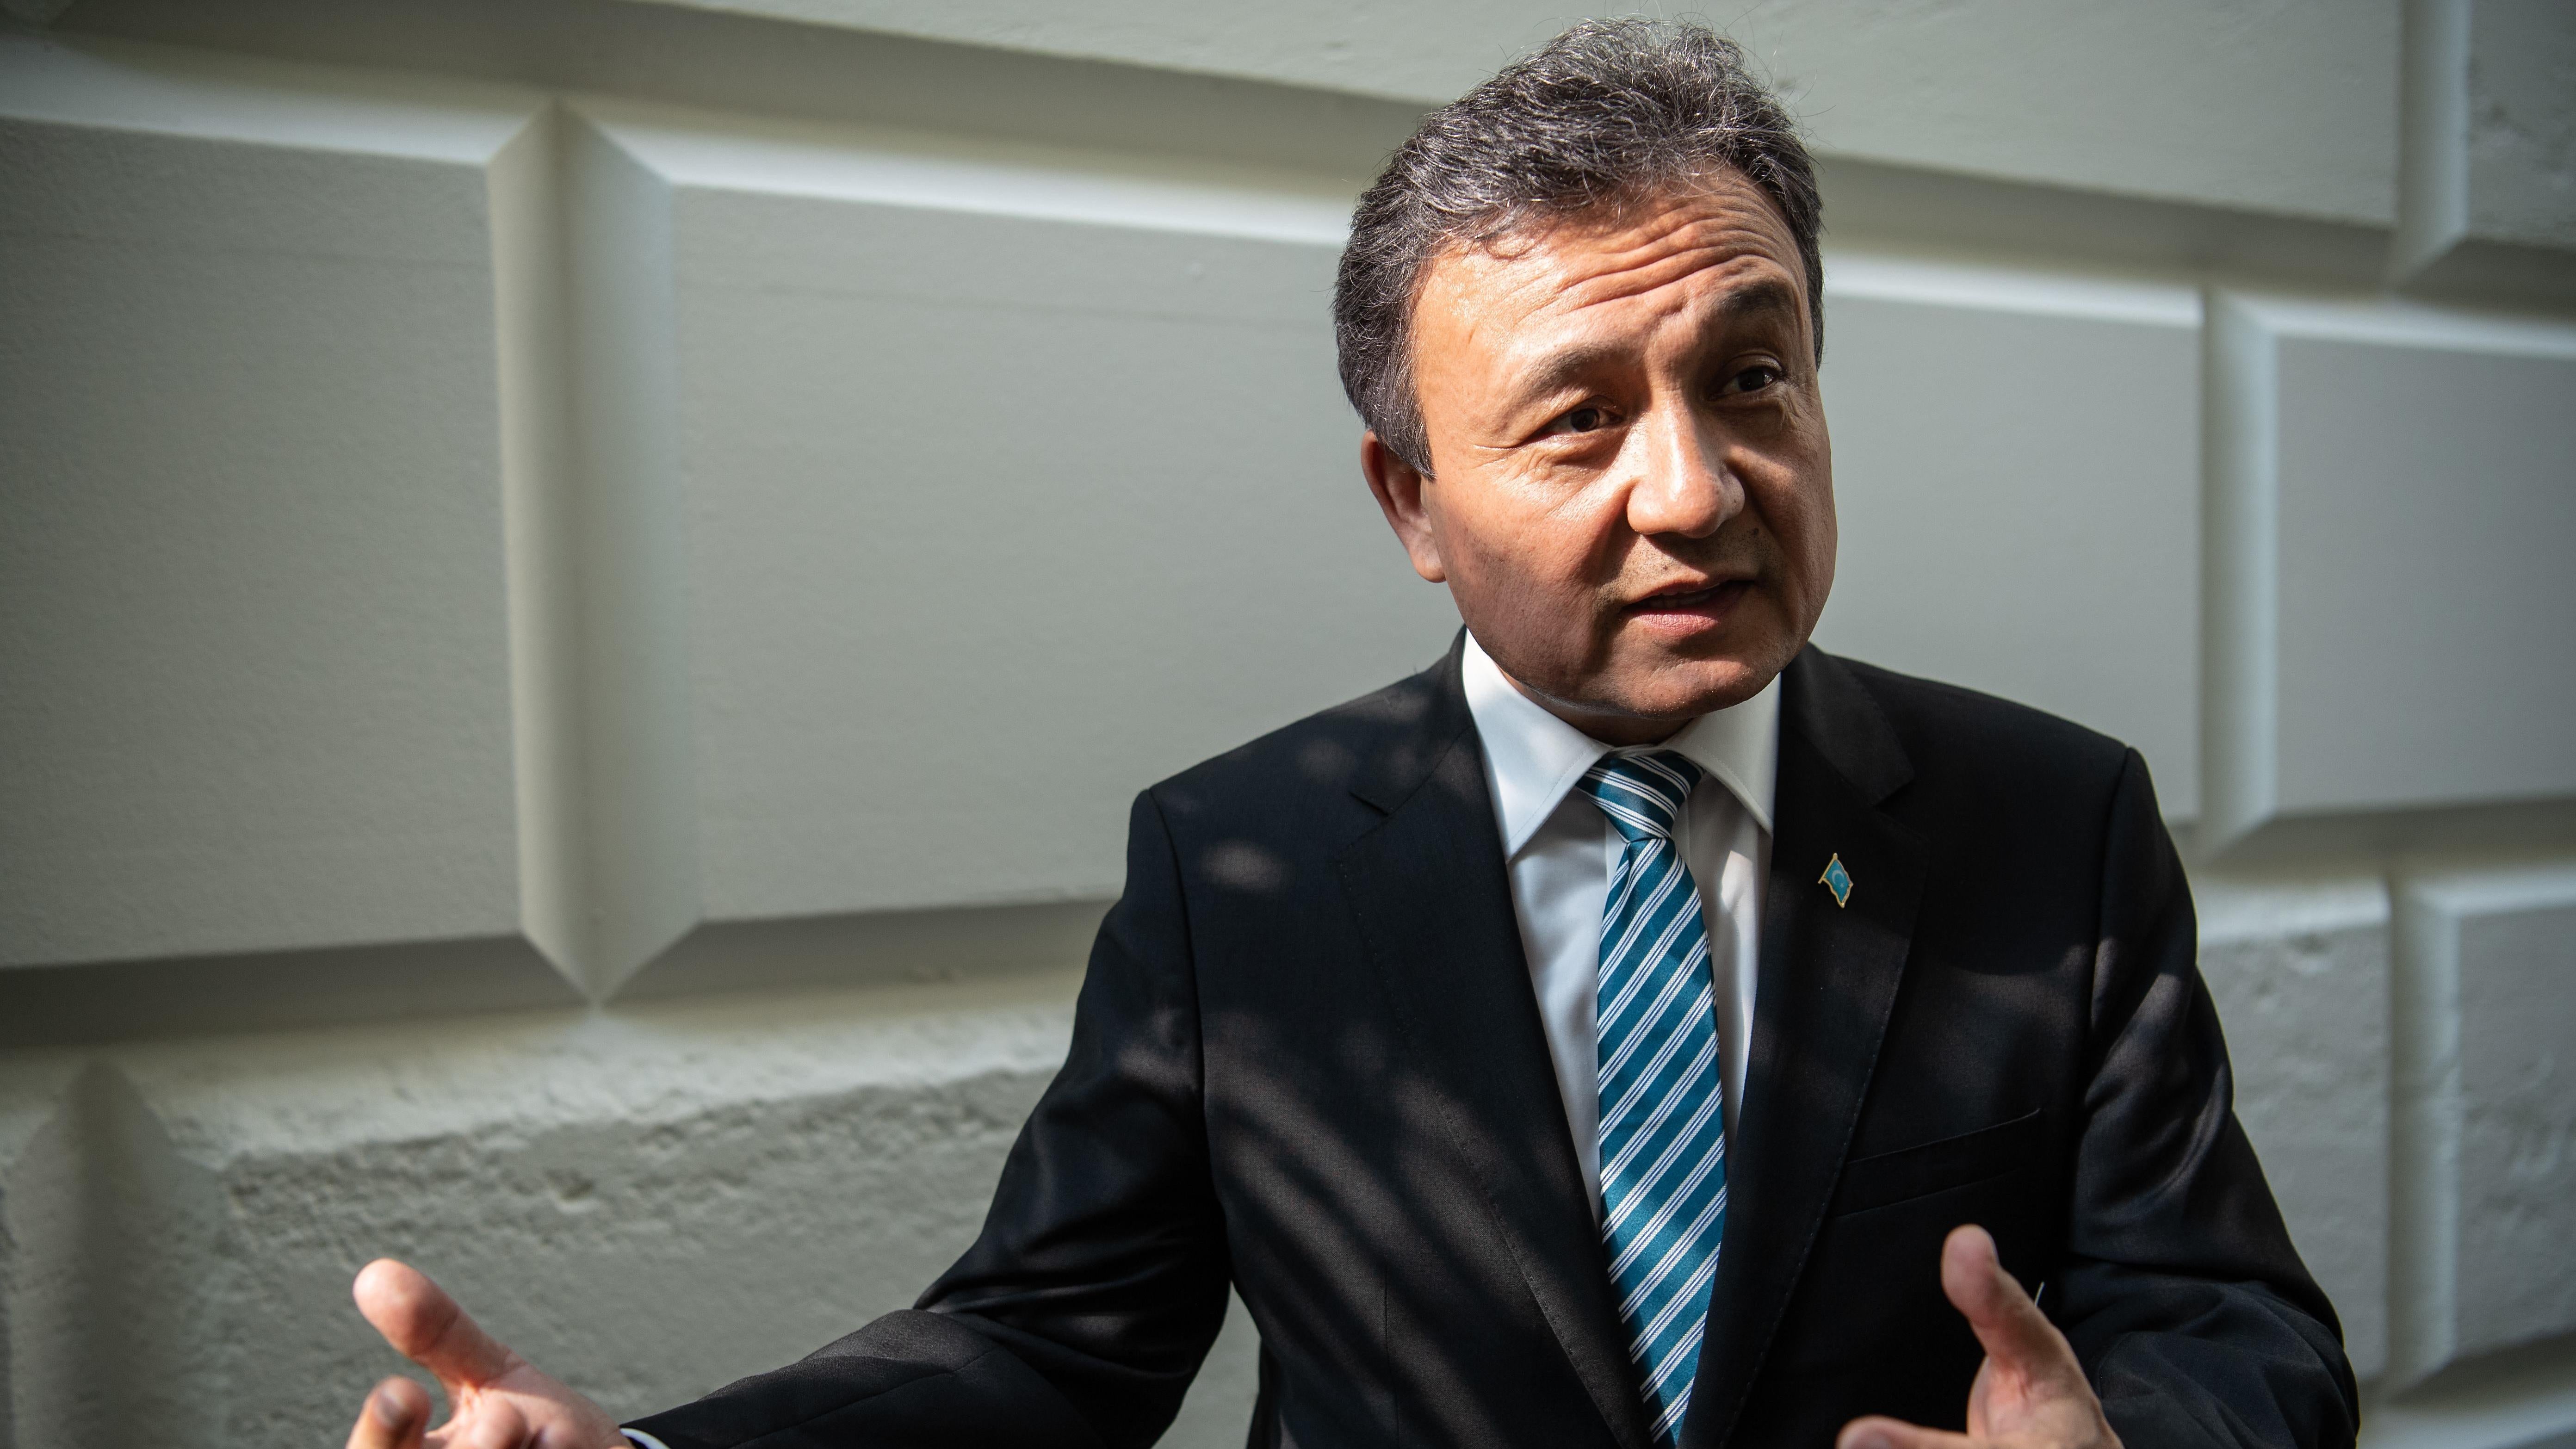 Dolkun Isa is the president of the World Uyghur Congress. (Photo: NICHOLAS KAMM/AFP, Getty Images)